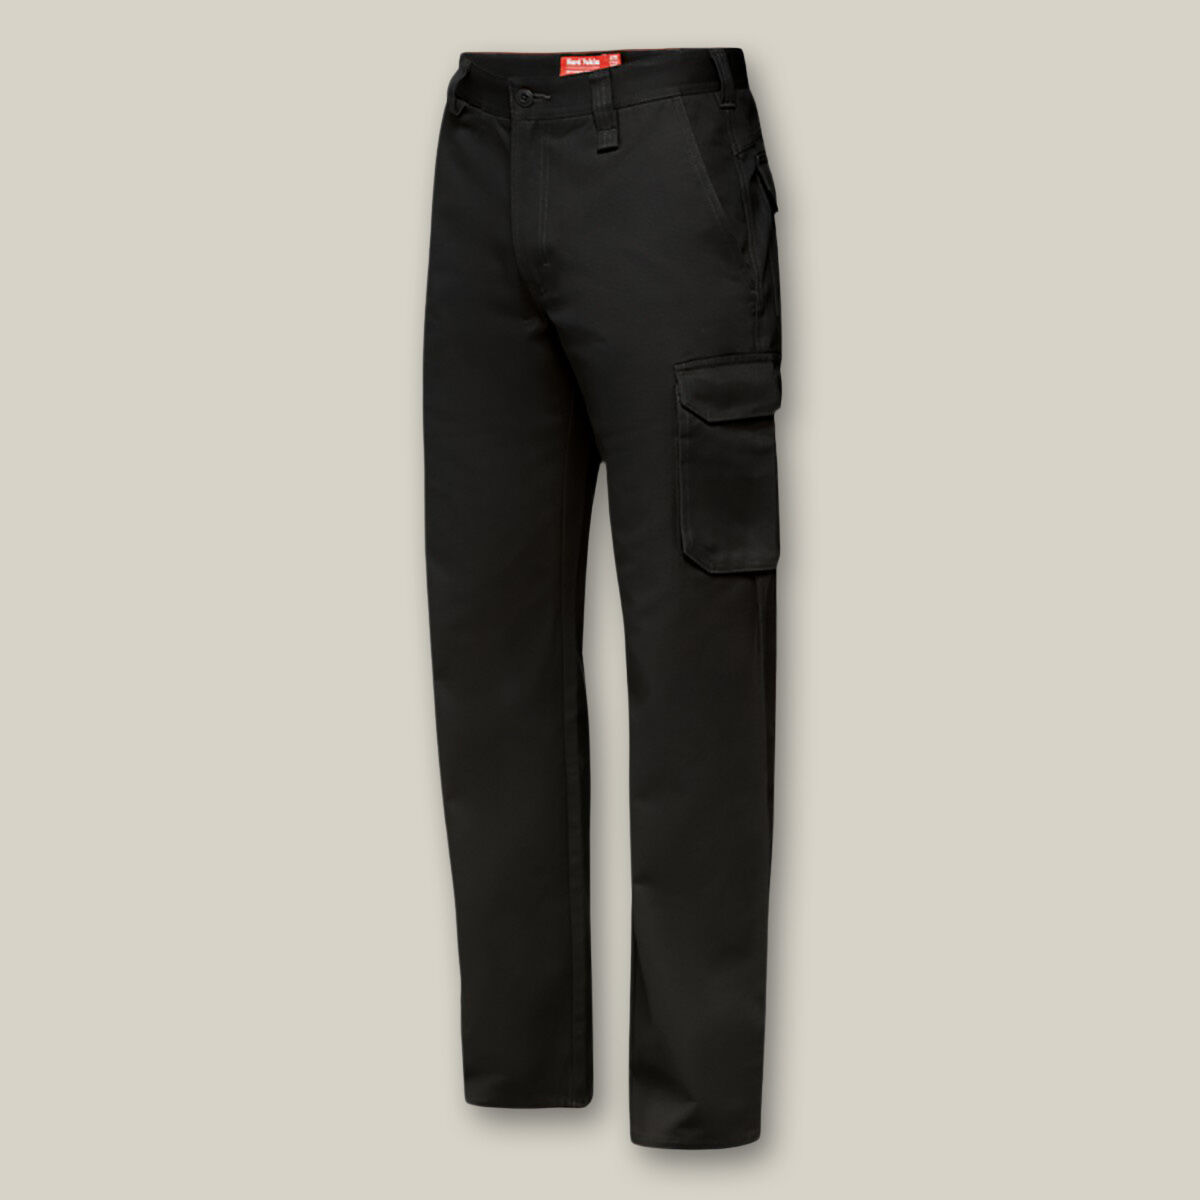 Lowes Navy Cargo Reflective Work Trousers  Lowes Menswear